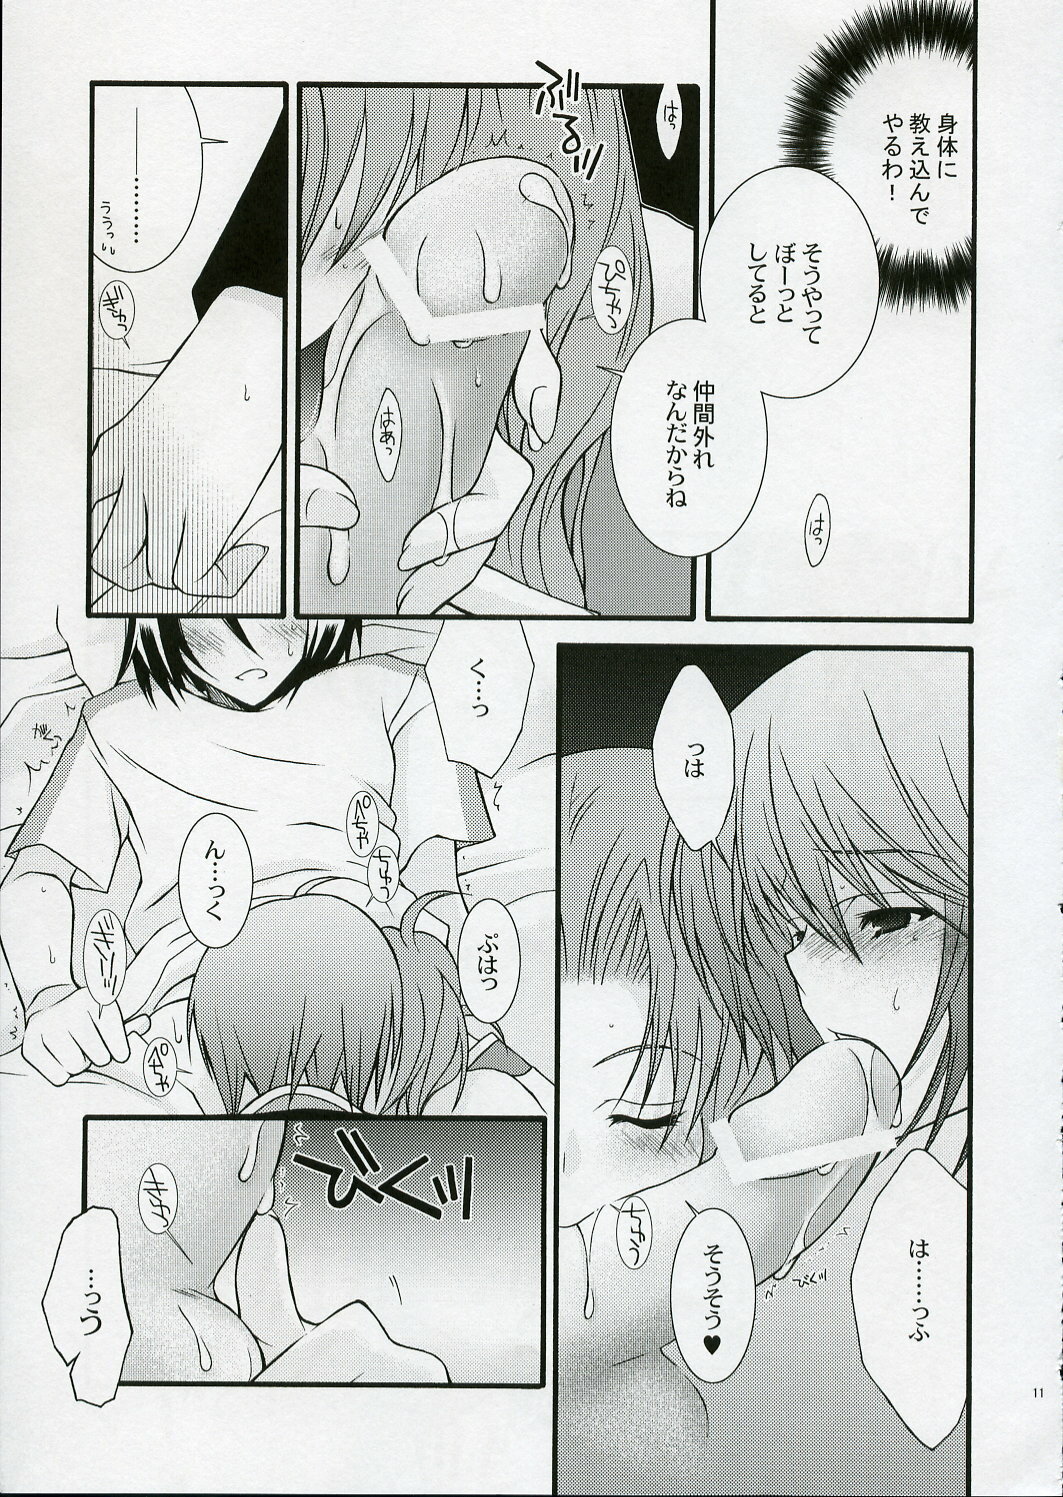 (SC28) [YLANG-YLANG (Ichie Ryouko)] RENDEZ-VOUS (Mobile Suit Gundam SEED DESTINY) page 10 full